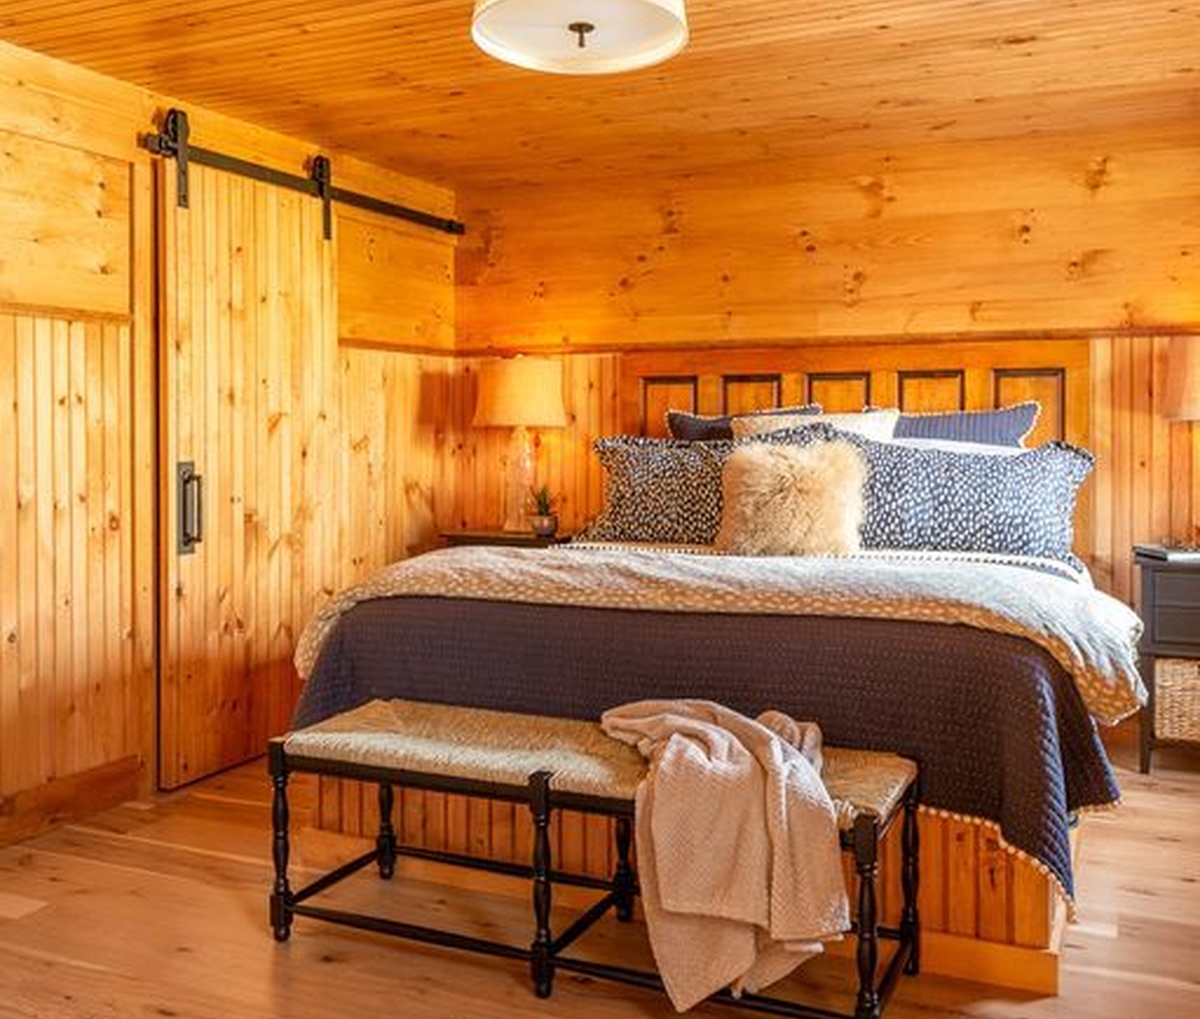 Custom-built bed with a reclaimed five-panel door headboard and built-in storage drawers underneath. (Camp Ridlon)